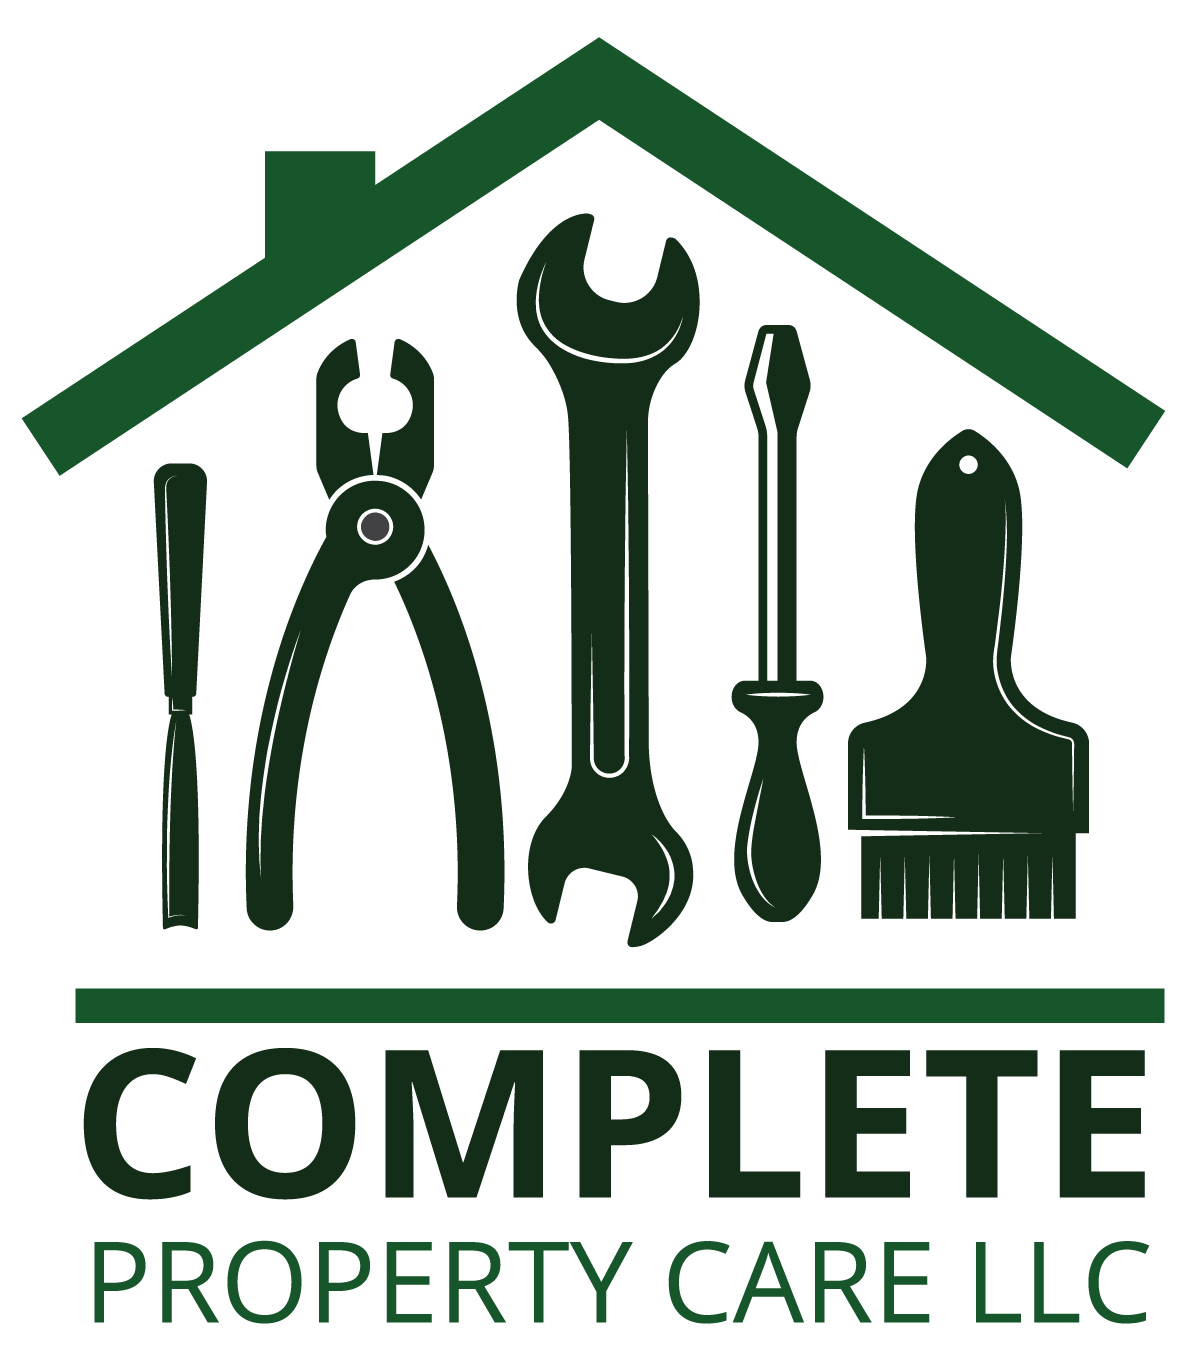 Complete Property Care Logo